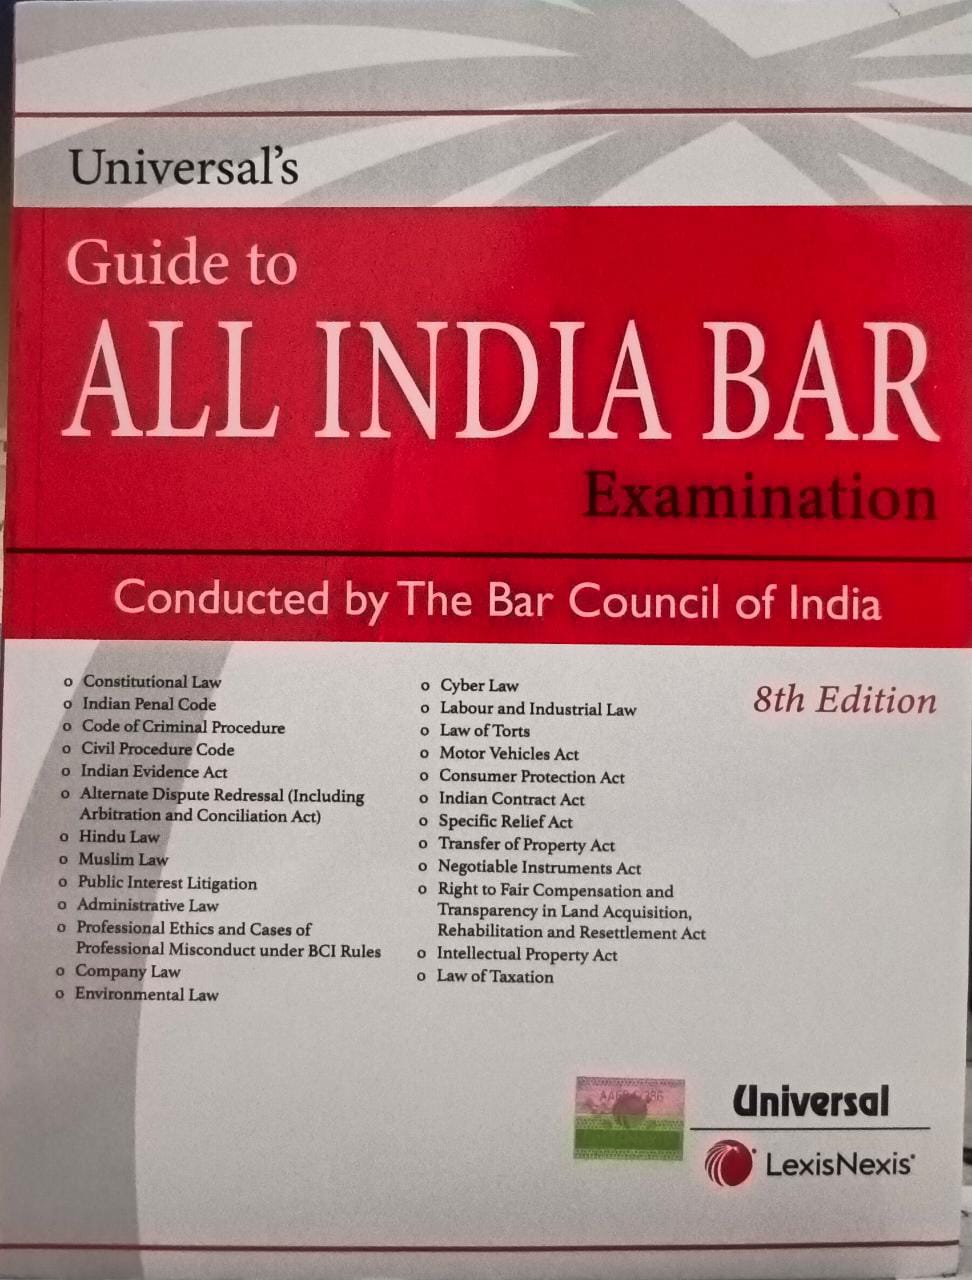 GUIDE TO ALL INDIA BAR EXAMINATION UNIVERSAL’S CONDUCTED BY THE BAR